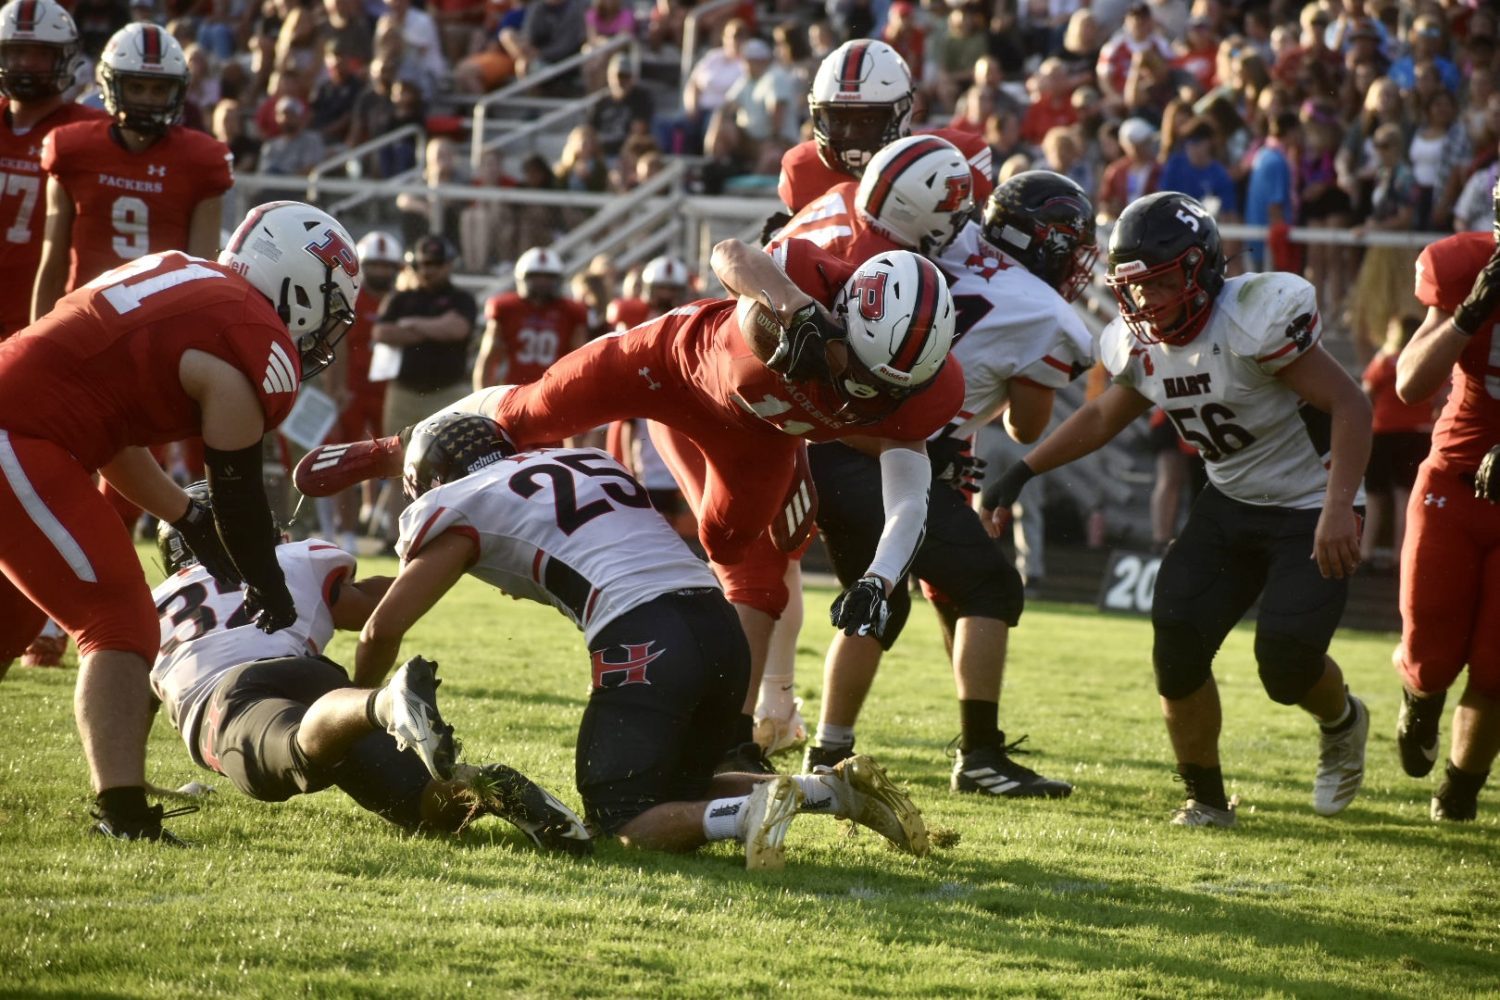 Defense stands tall in Hart’s season-opening victory over Fremont